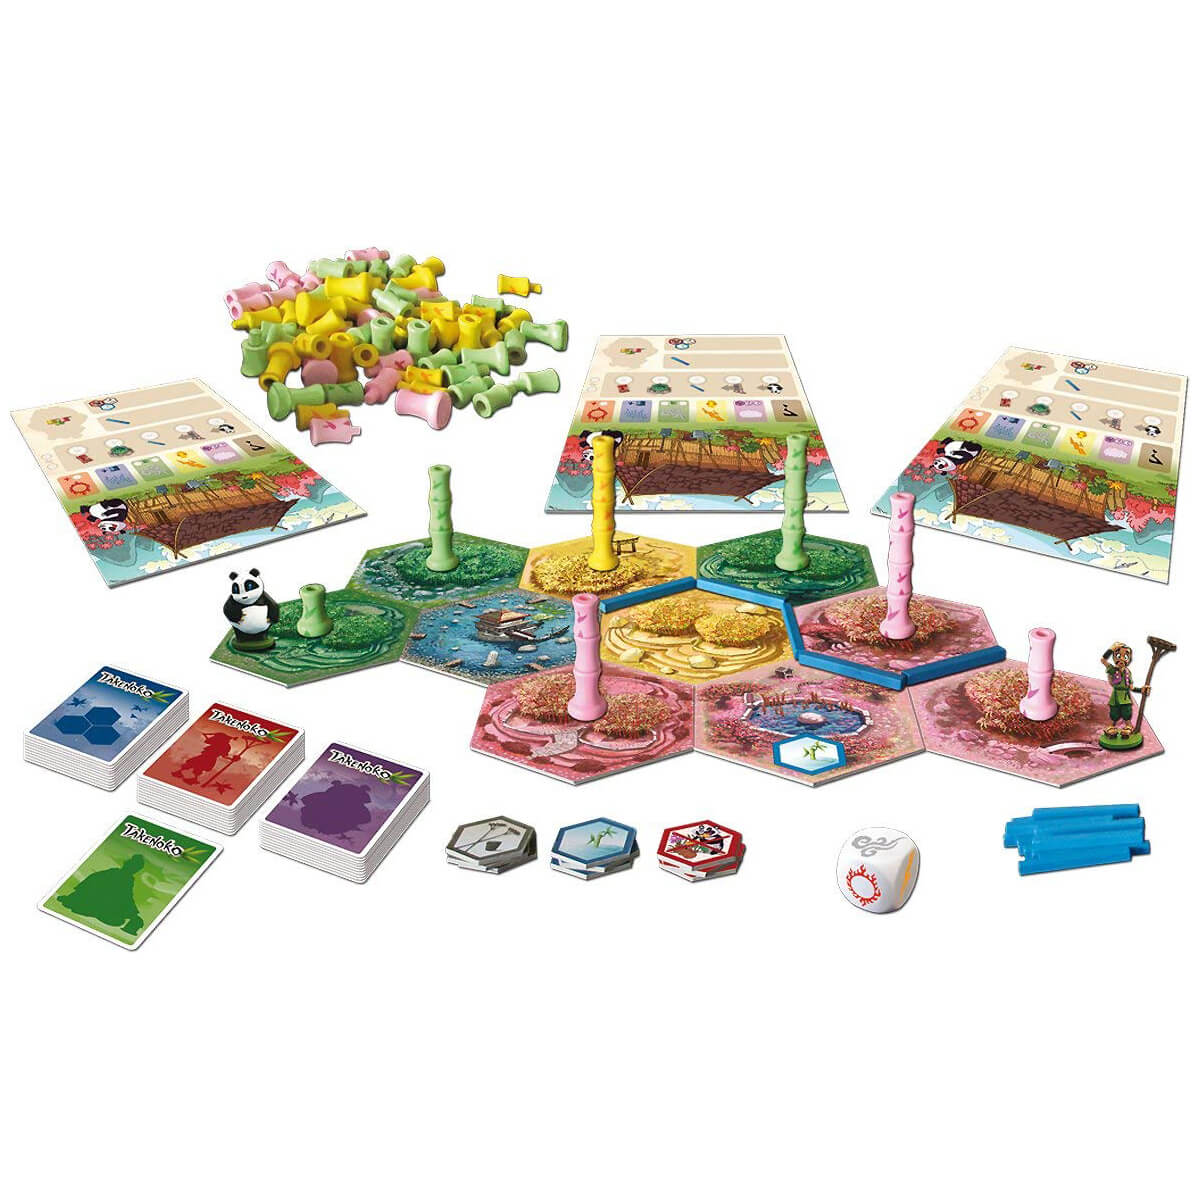 Takenoko game board and pieces layed out.